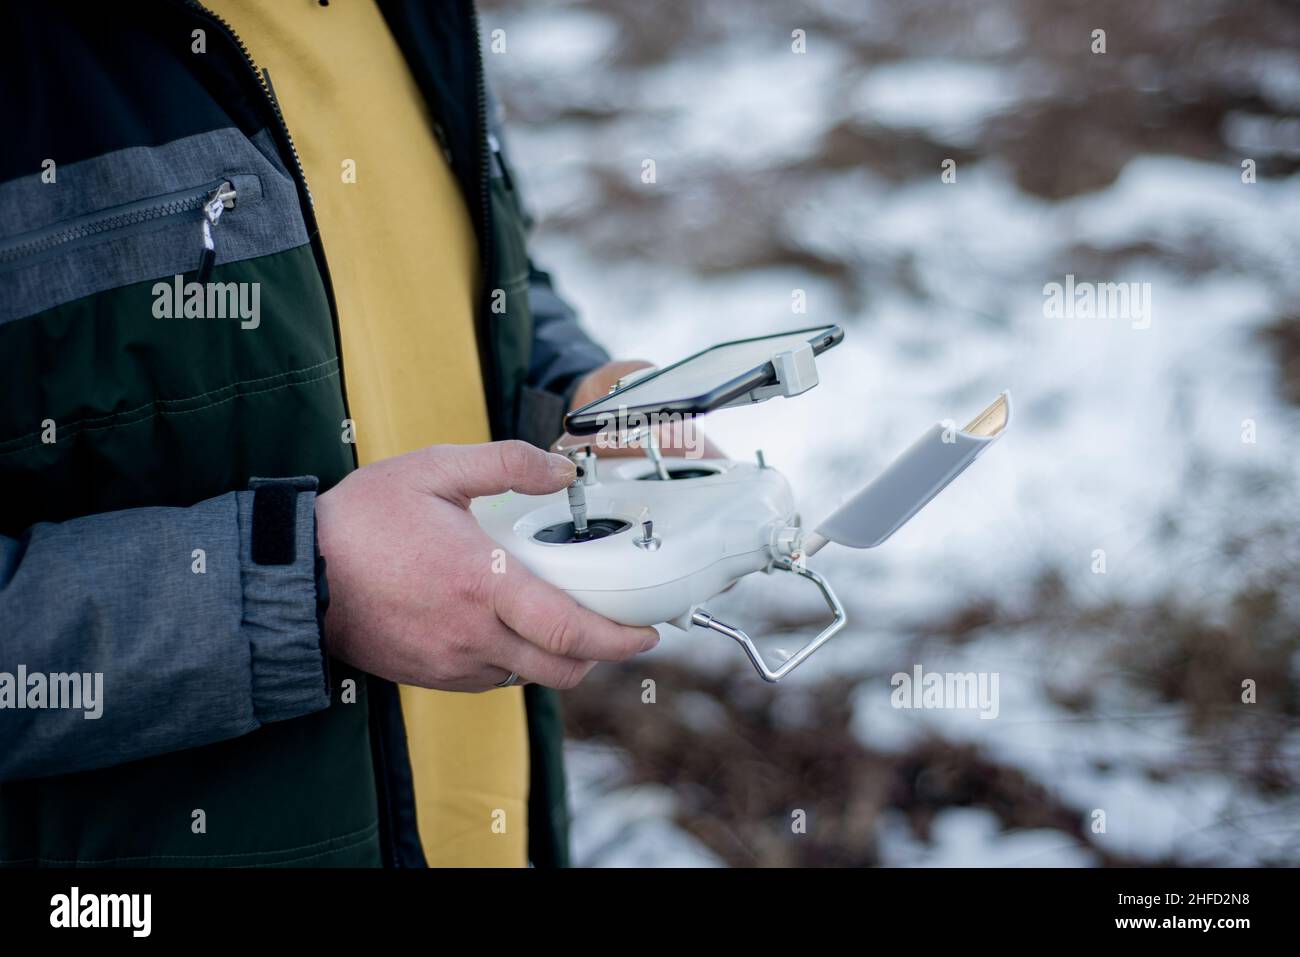 drone operator outdoors in snow Stock Photo